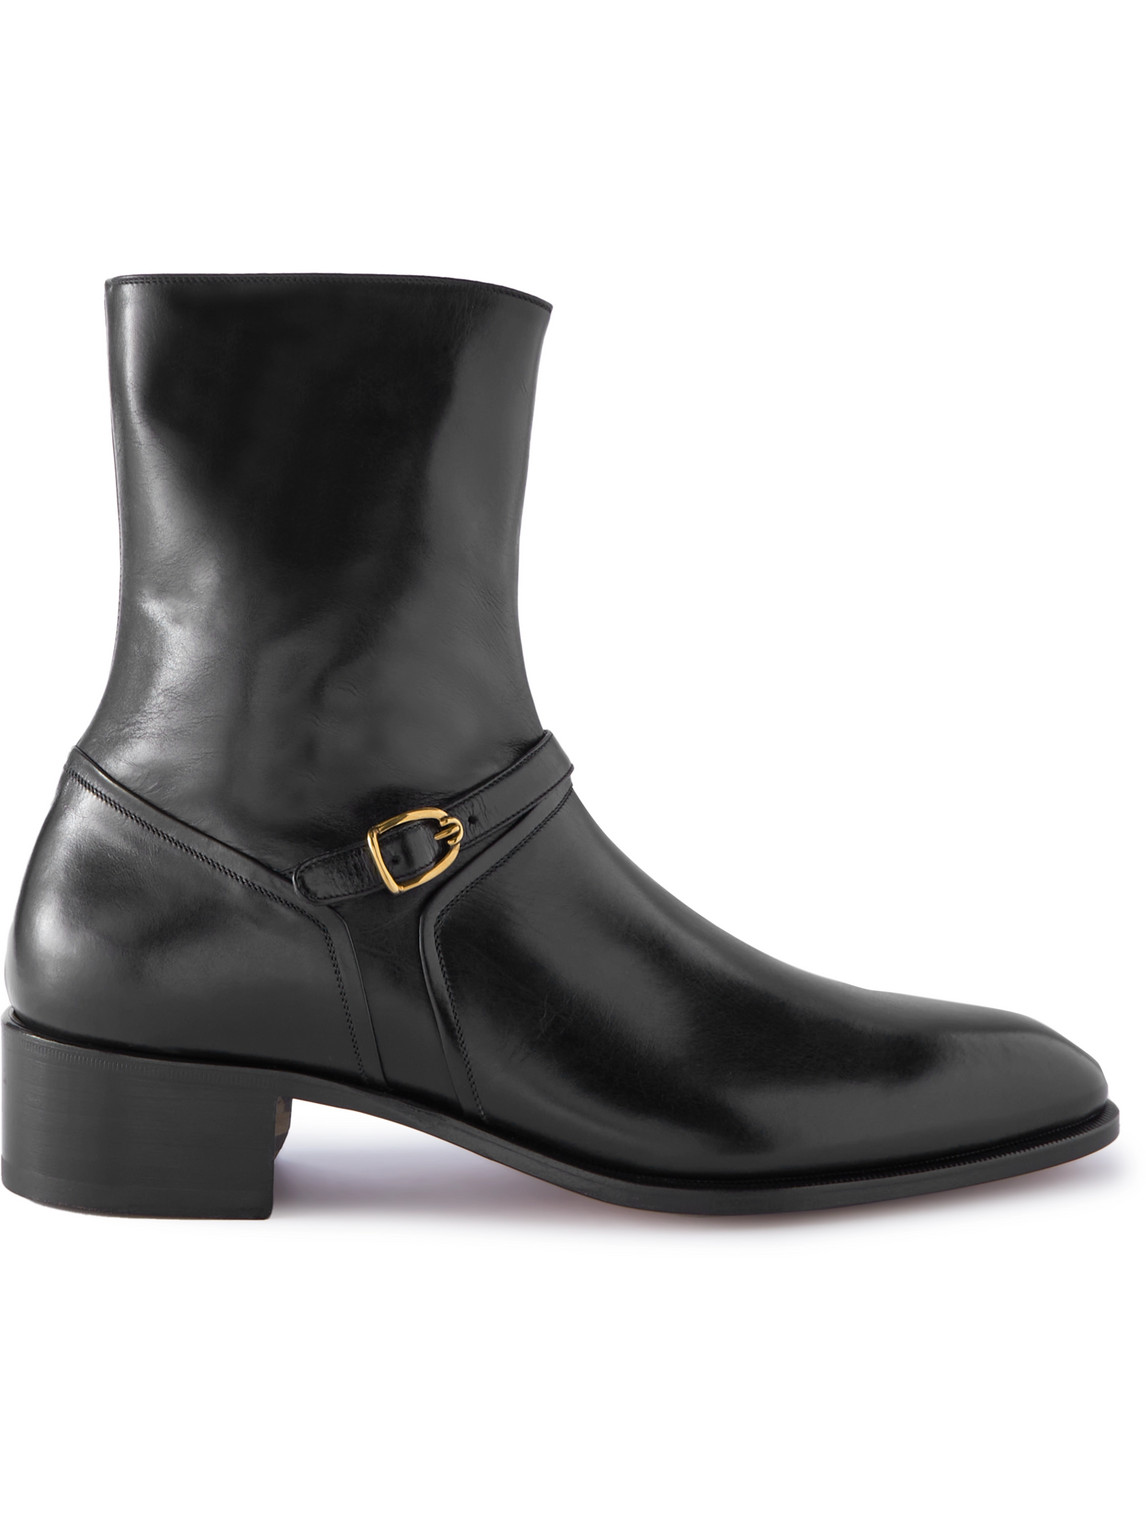 TOM FORD BUCKLED POLISHED-LEATHER BOOTS